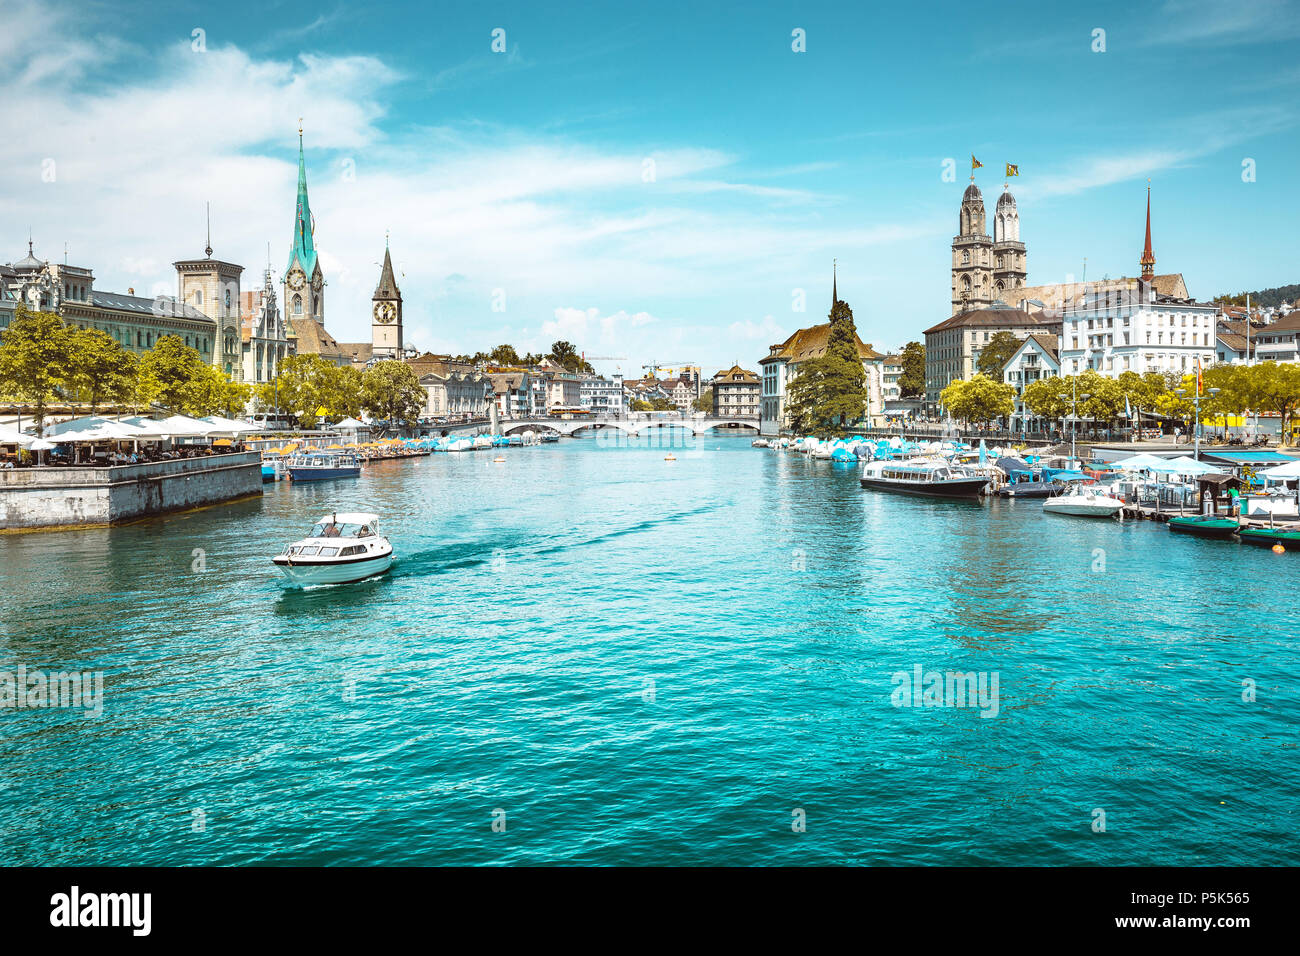 Panoramic view of Zurich city center with churches and boats on beautiful river Limmat in summer, Canton of Zurich, Switzerland Stock Photo